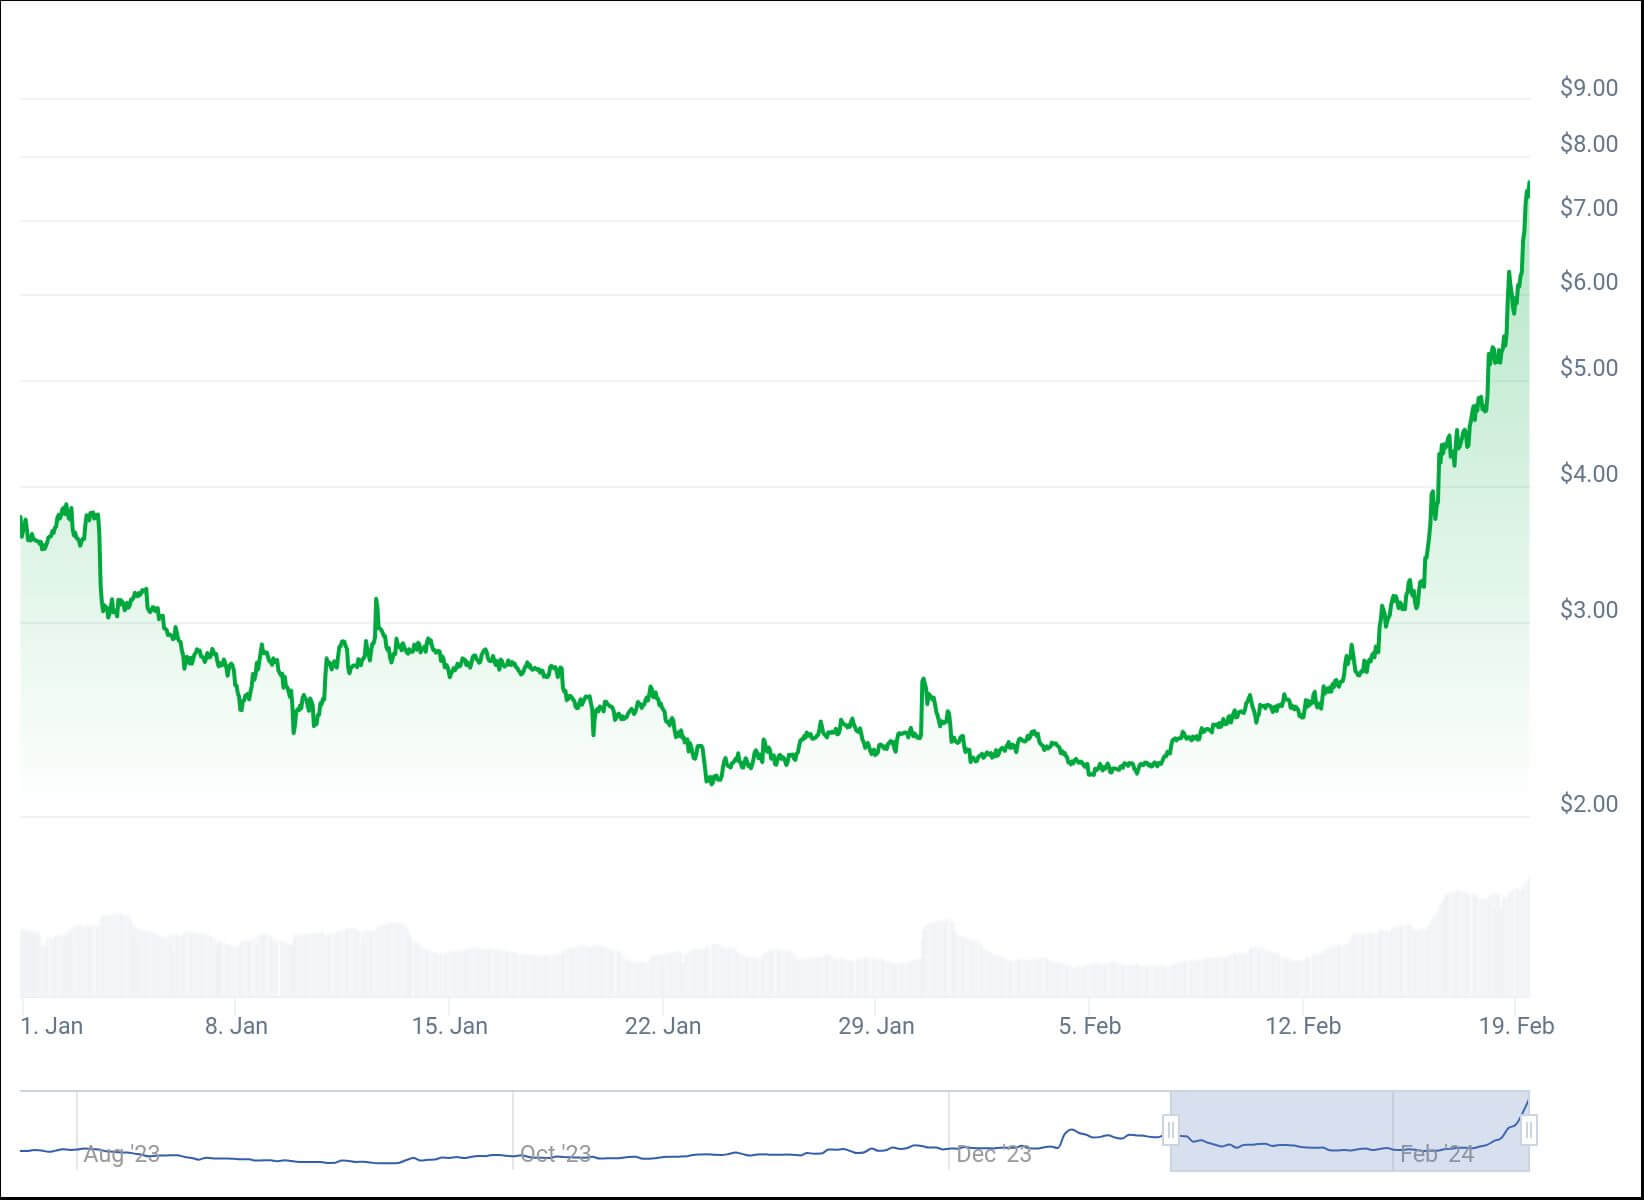 Worldcoin's WLD Token has skyrocketed more than 170% in the past two weeks.